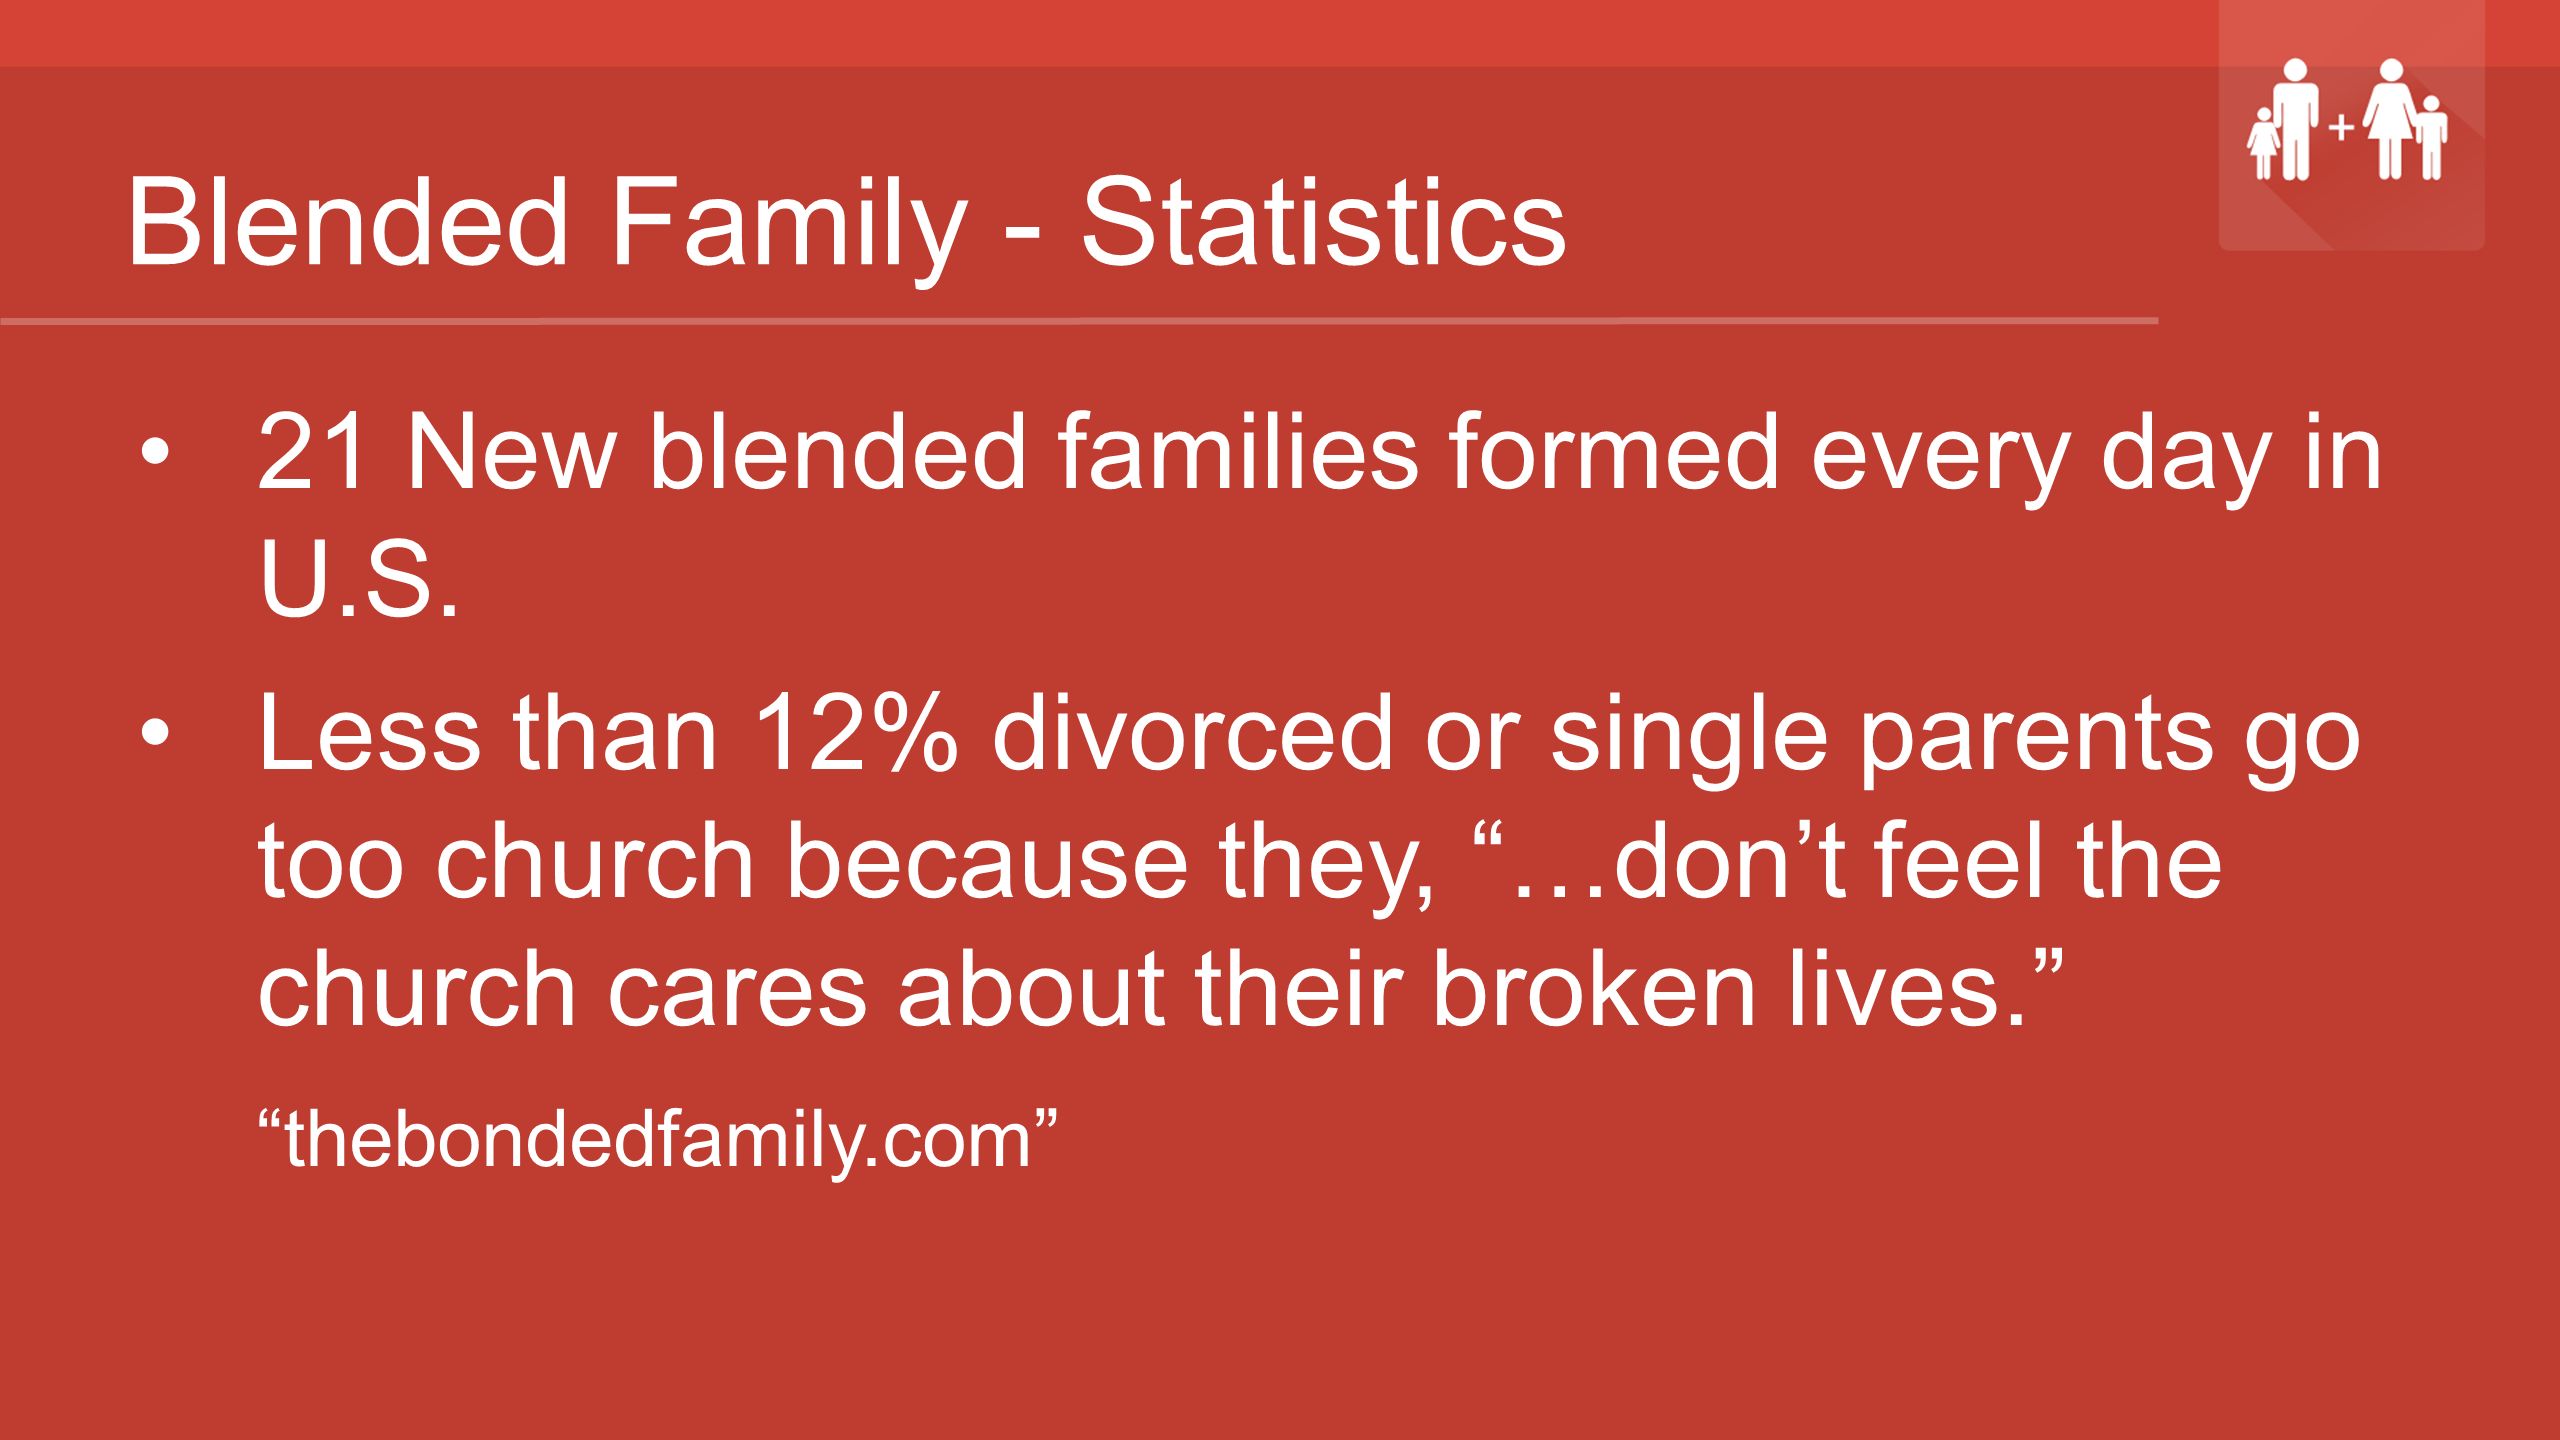 Blended Family - Statistics 21 New blended families formed every day in U.S.